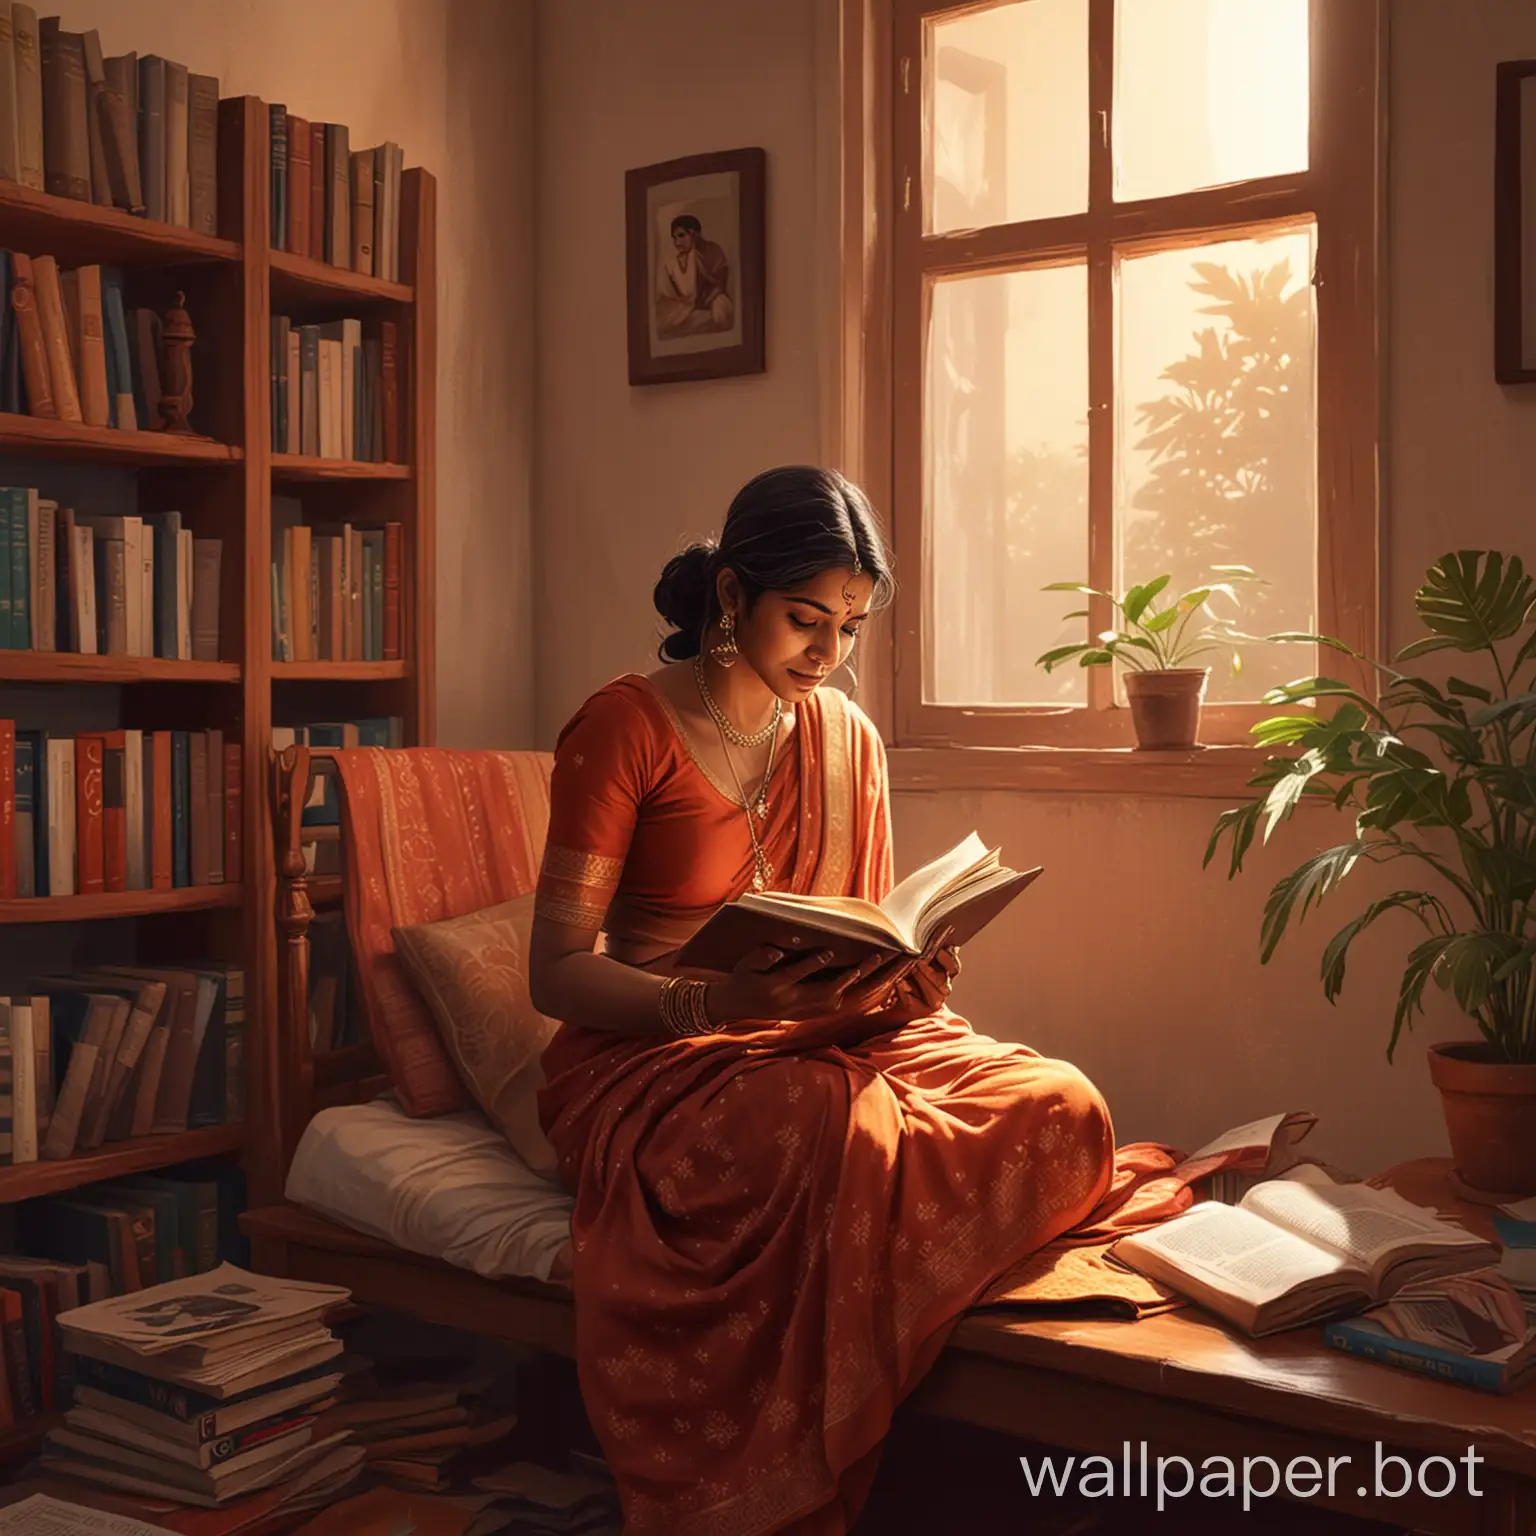 digital illustration of an indian woman reading a book in her reading room